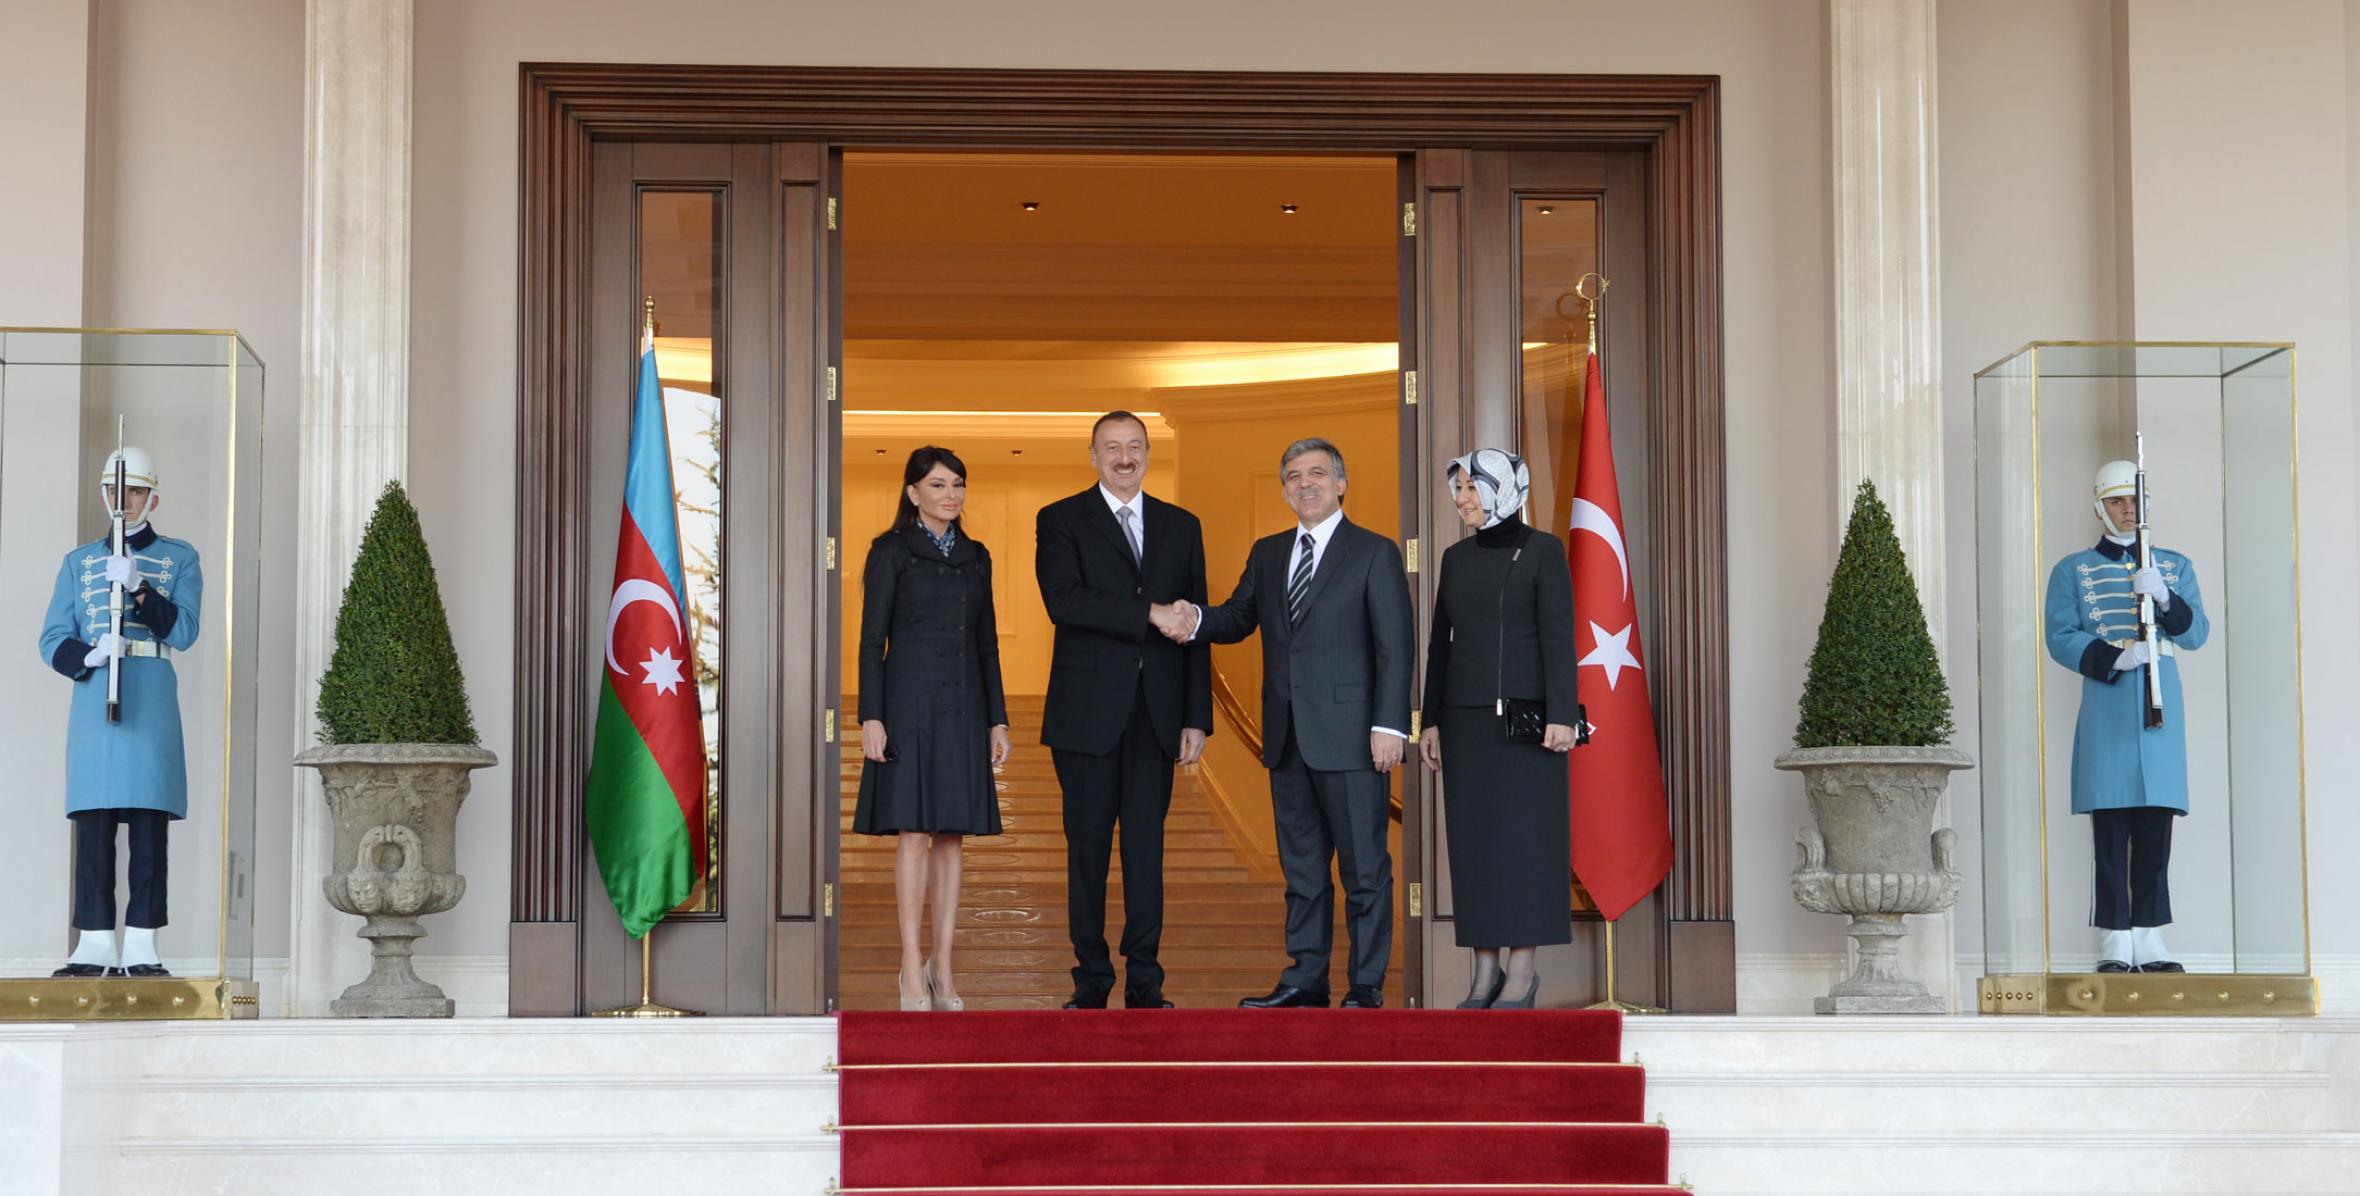 An official ceremony to welcome Ilham Aliyev has been held at Cankaya Palace